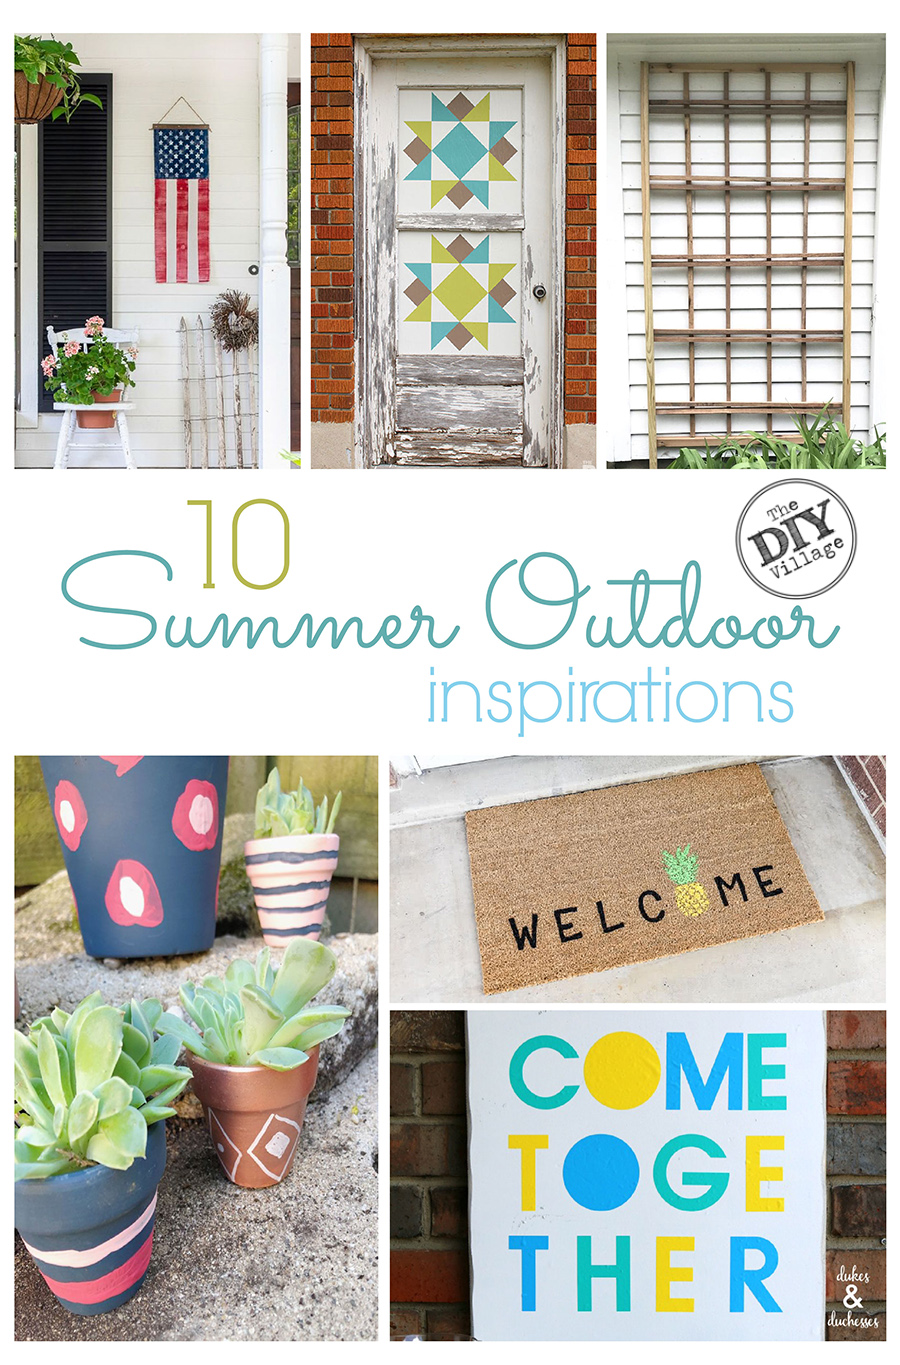 10 great ideas and inspirations for getting your outdoors ready. #summer #outdoordecor #outdoordiy